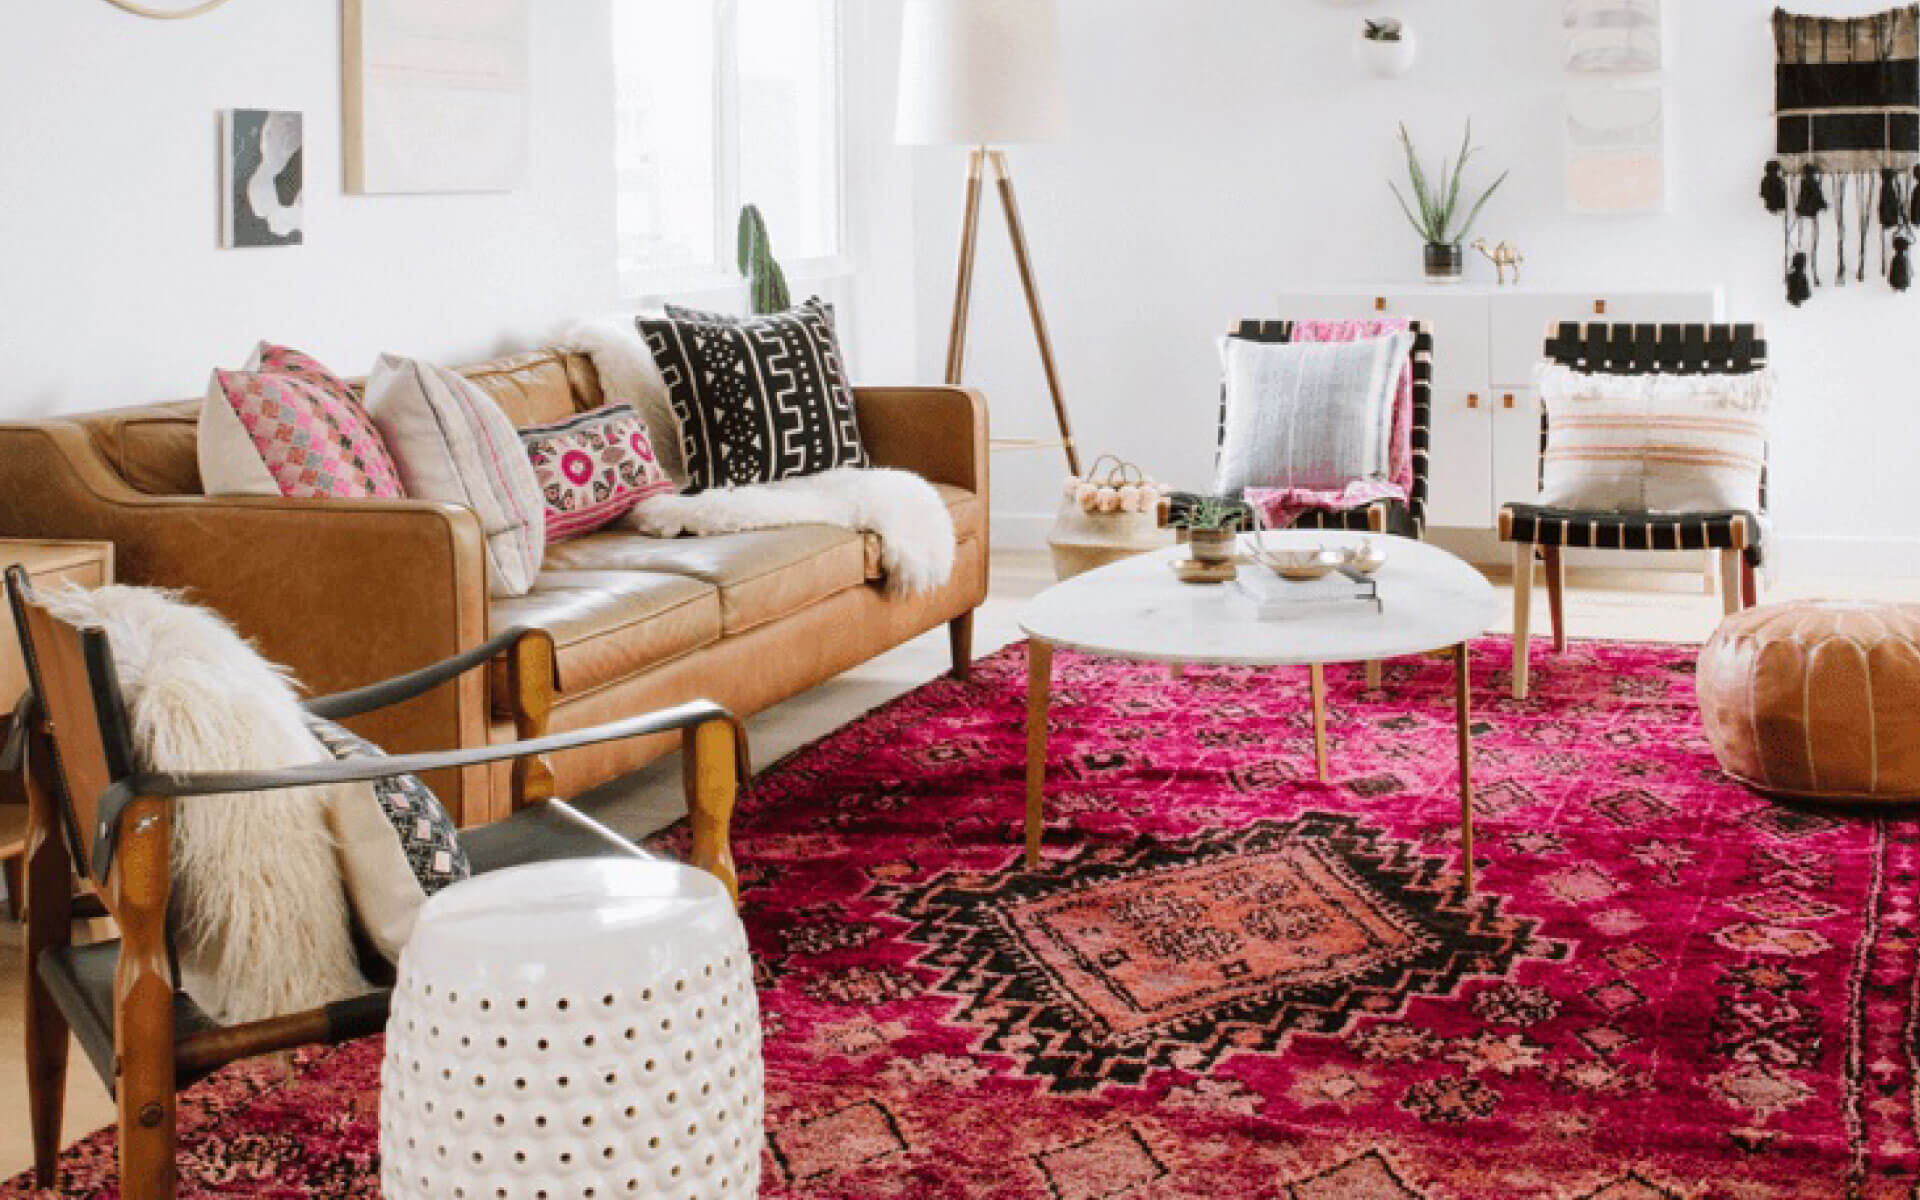 Your guide to buying Moroccan rugs